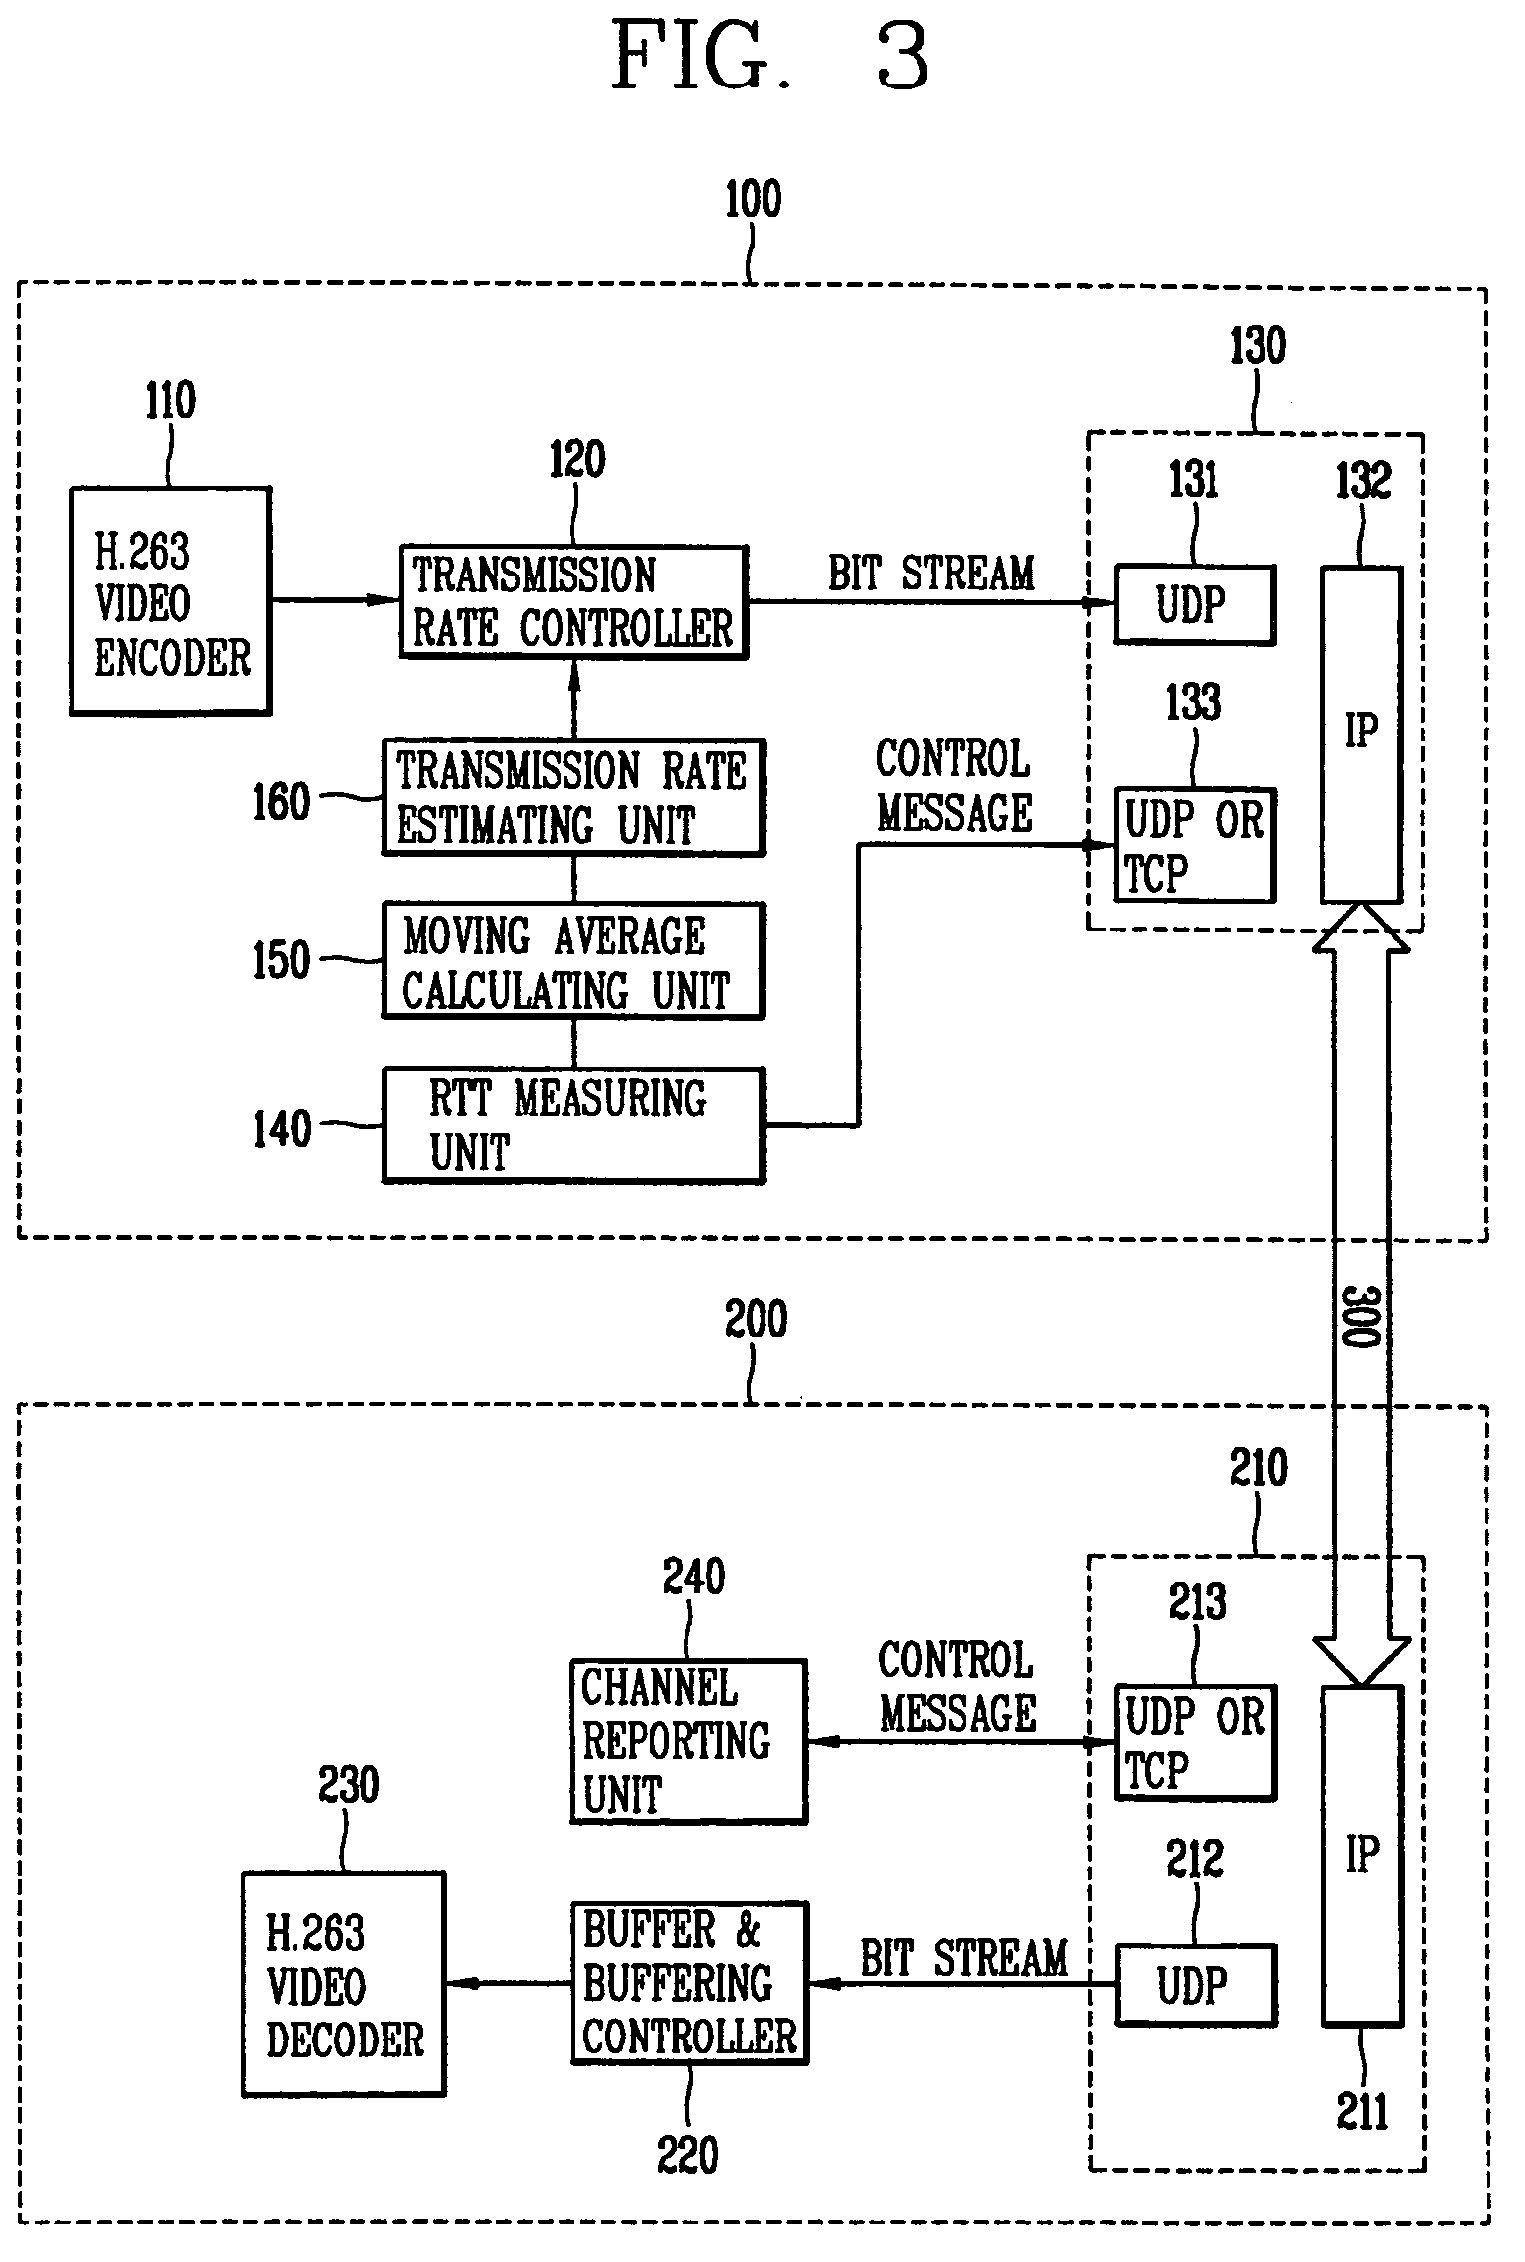 Roundtrip delay time measurement apparatus and method for variable bit rate multimedia data